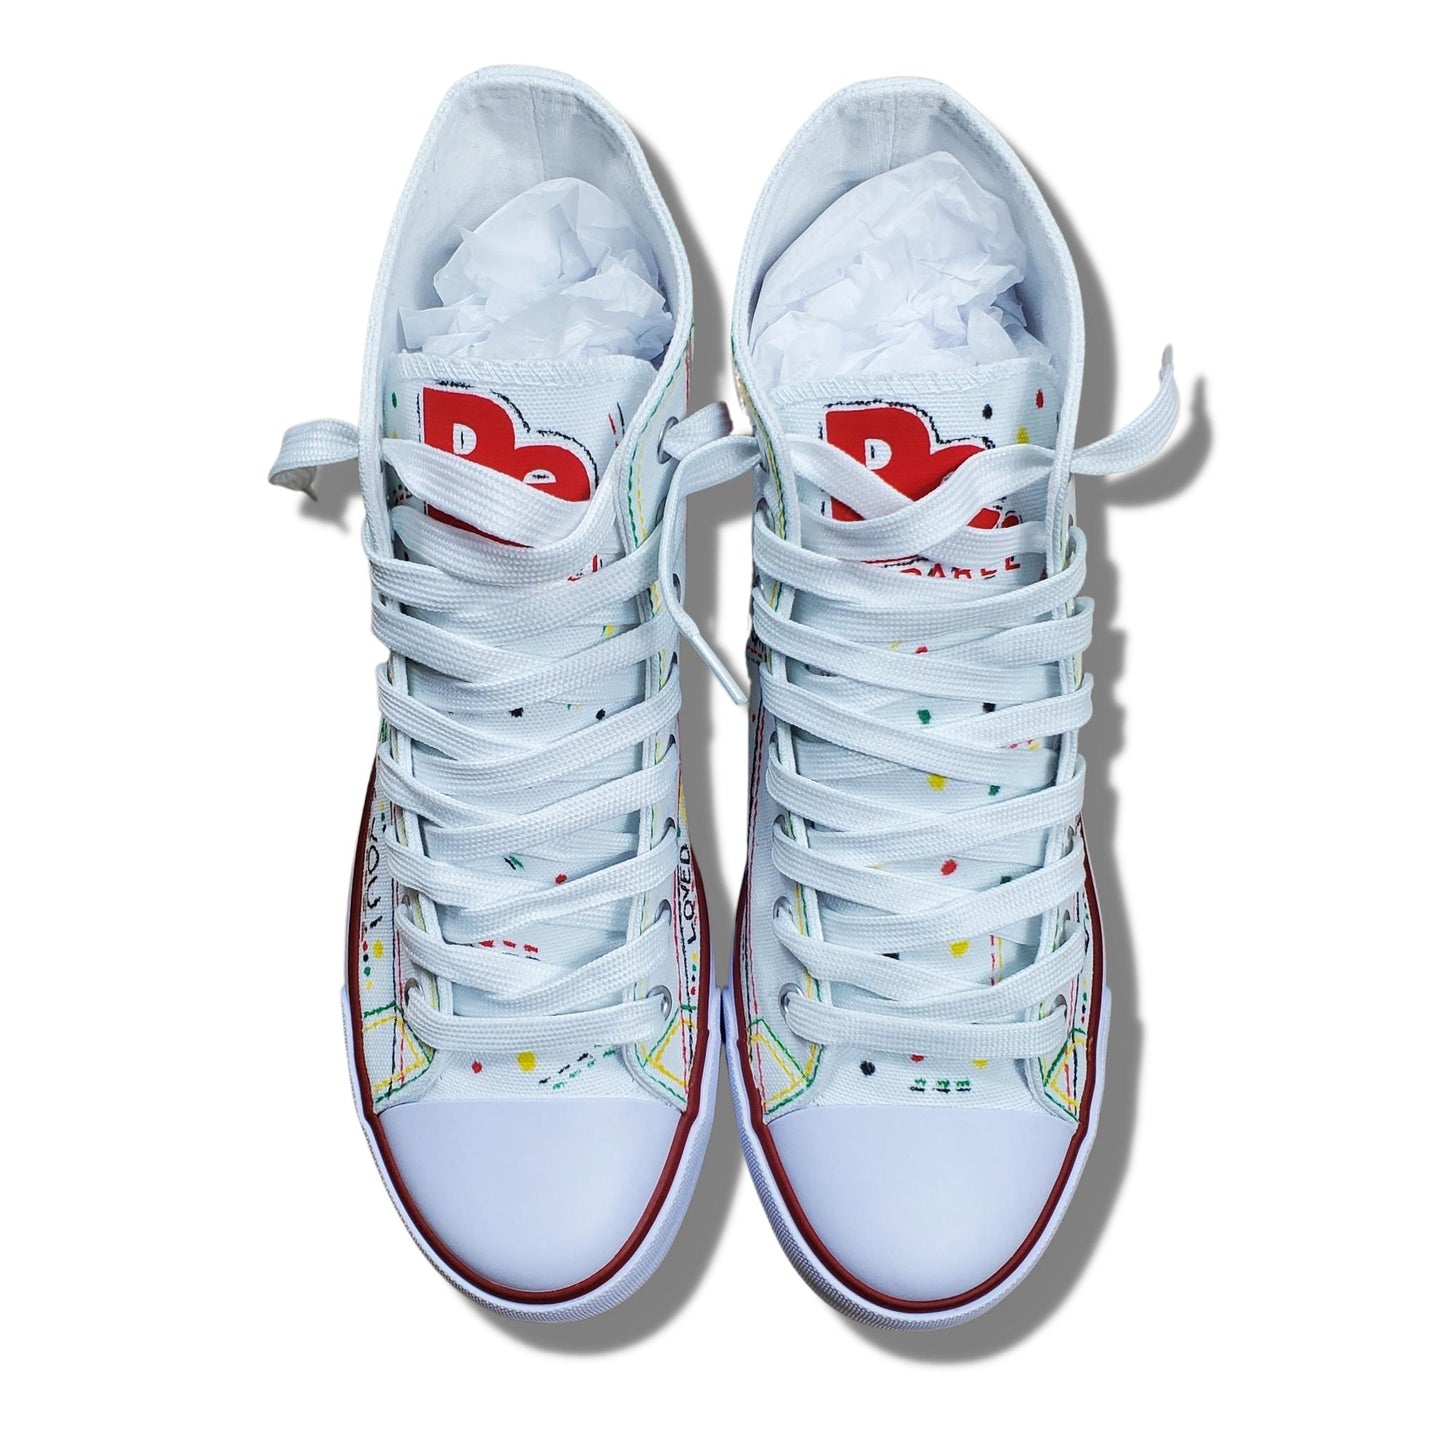 BE. CUSTOMIZED CANVAS SNEAKERS - Womens White Multicolored